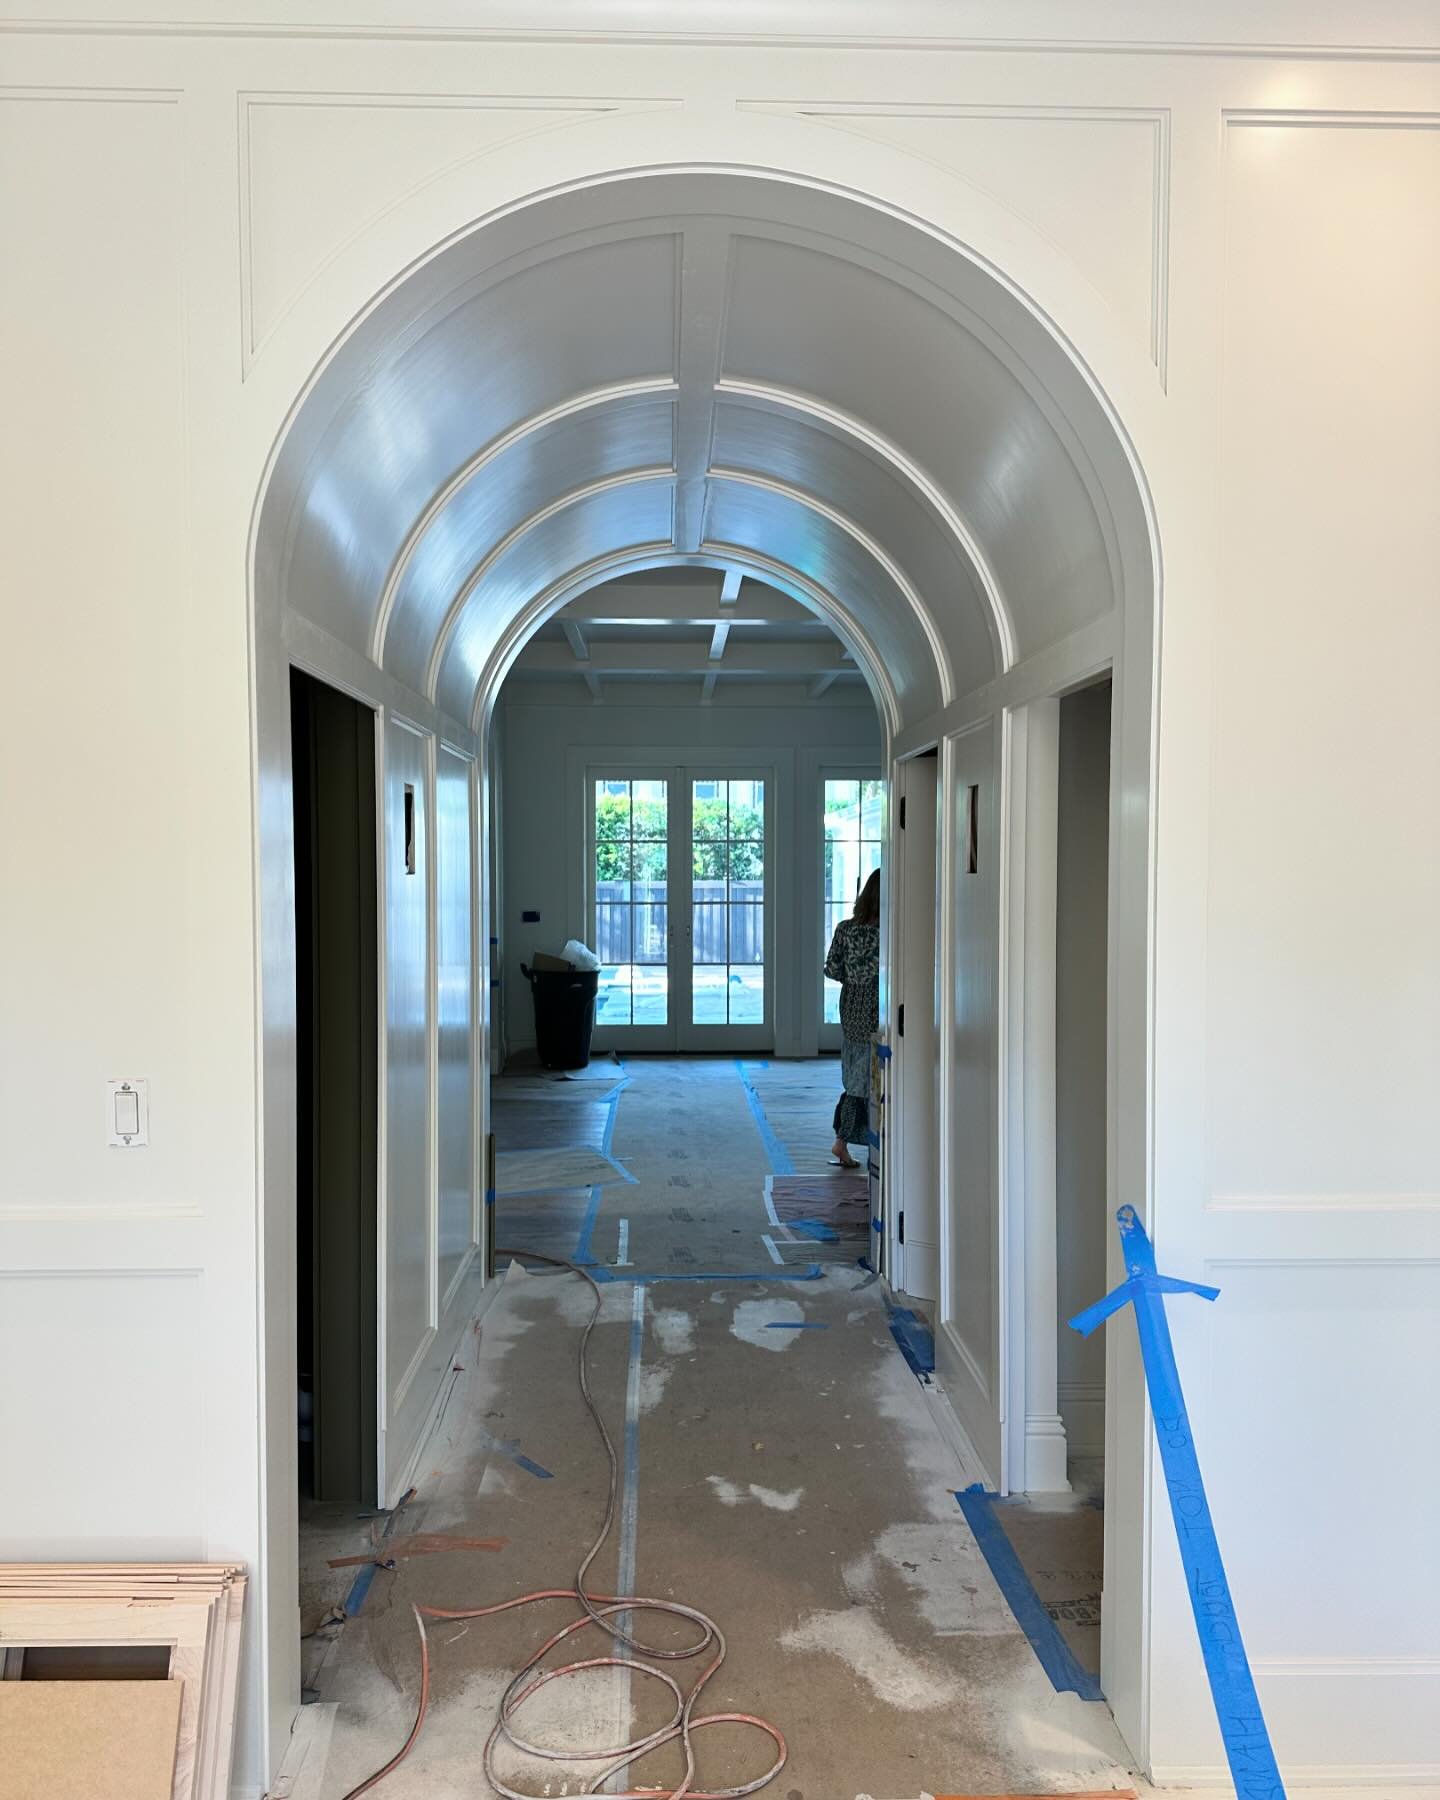 Had an amazing visit to one of our FLA projects last week. Check out progress shots  in our story. @hudsoninteriordesigns #florida #interiors #interiordesigns #newbuild #clientdiaries